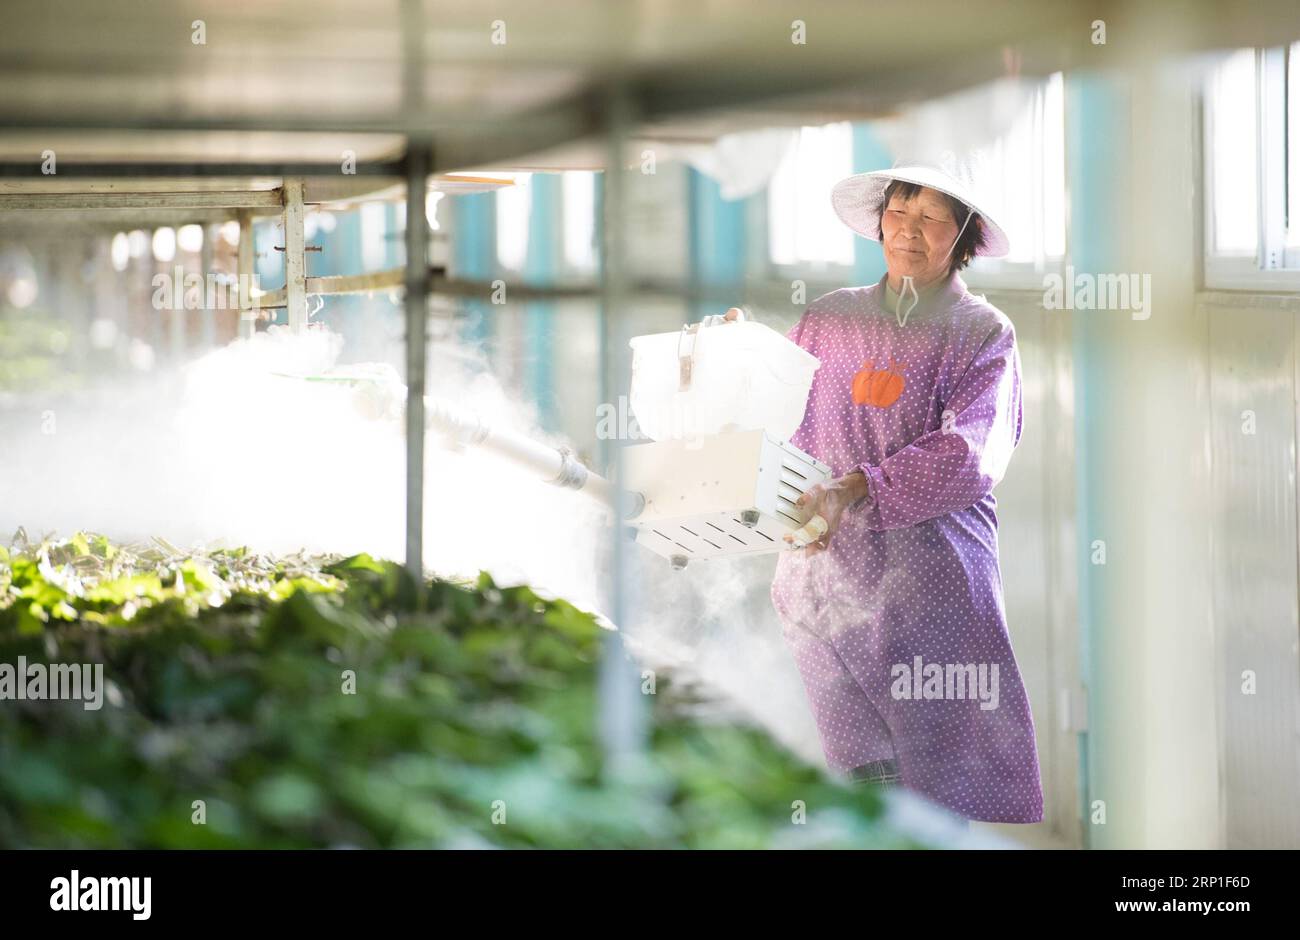 (180702) -- CHUN AN, July 2, 2018 -- A worker sprays disinfectant at a silkworm breeding base of Cathaya Group in Xiajiang Village of Chun an County, east China s Zhejiang Province, May 9, 2018. Chun an County cooperated with Cathaya Group in building silkworm breeding bases to produce high quality cocoon and silk products. To date, about 4,000 hectares mulberry bushes have been cultivated and some 300 tonnes raw silk are produced per year. )(wsw) CHINA-ZHEJIANG-SILK INDUSTRY (CN) WengxXinyang PUBLICATIONxNOTxINxCHN Stock Photo